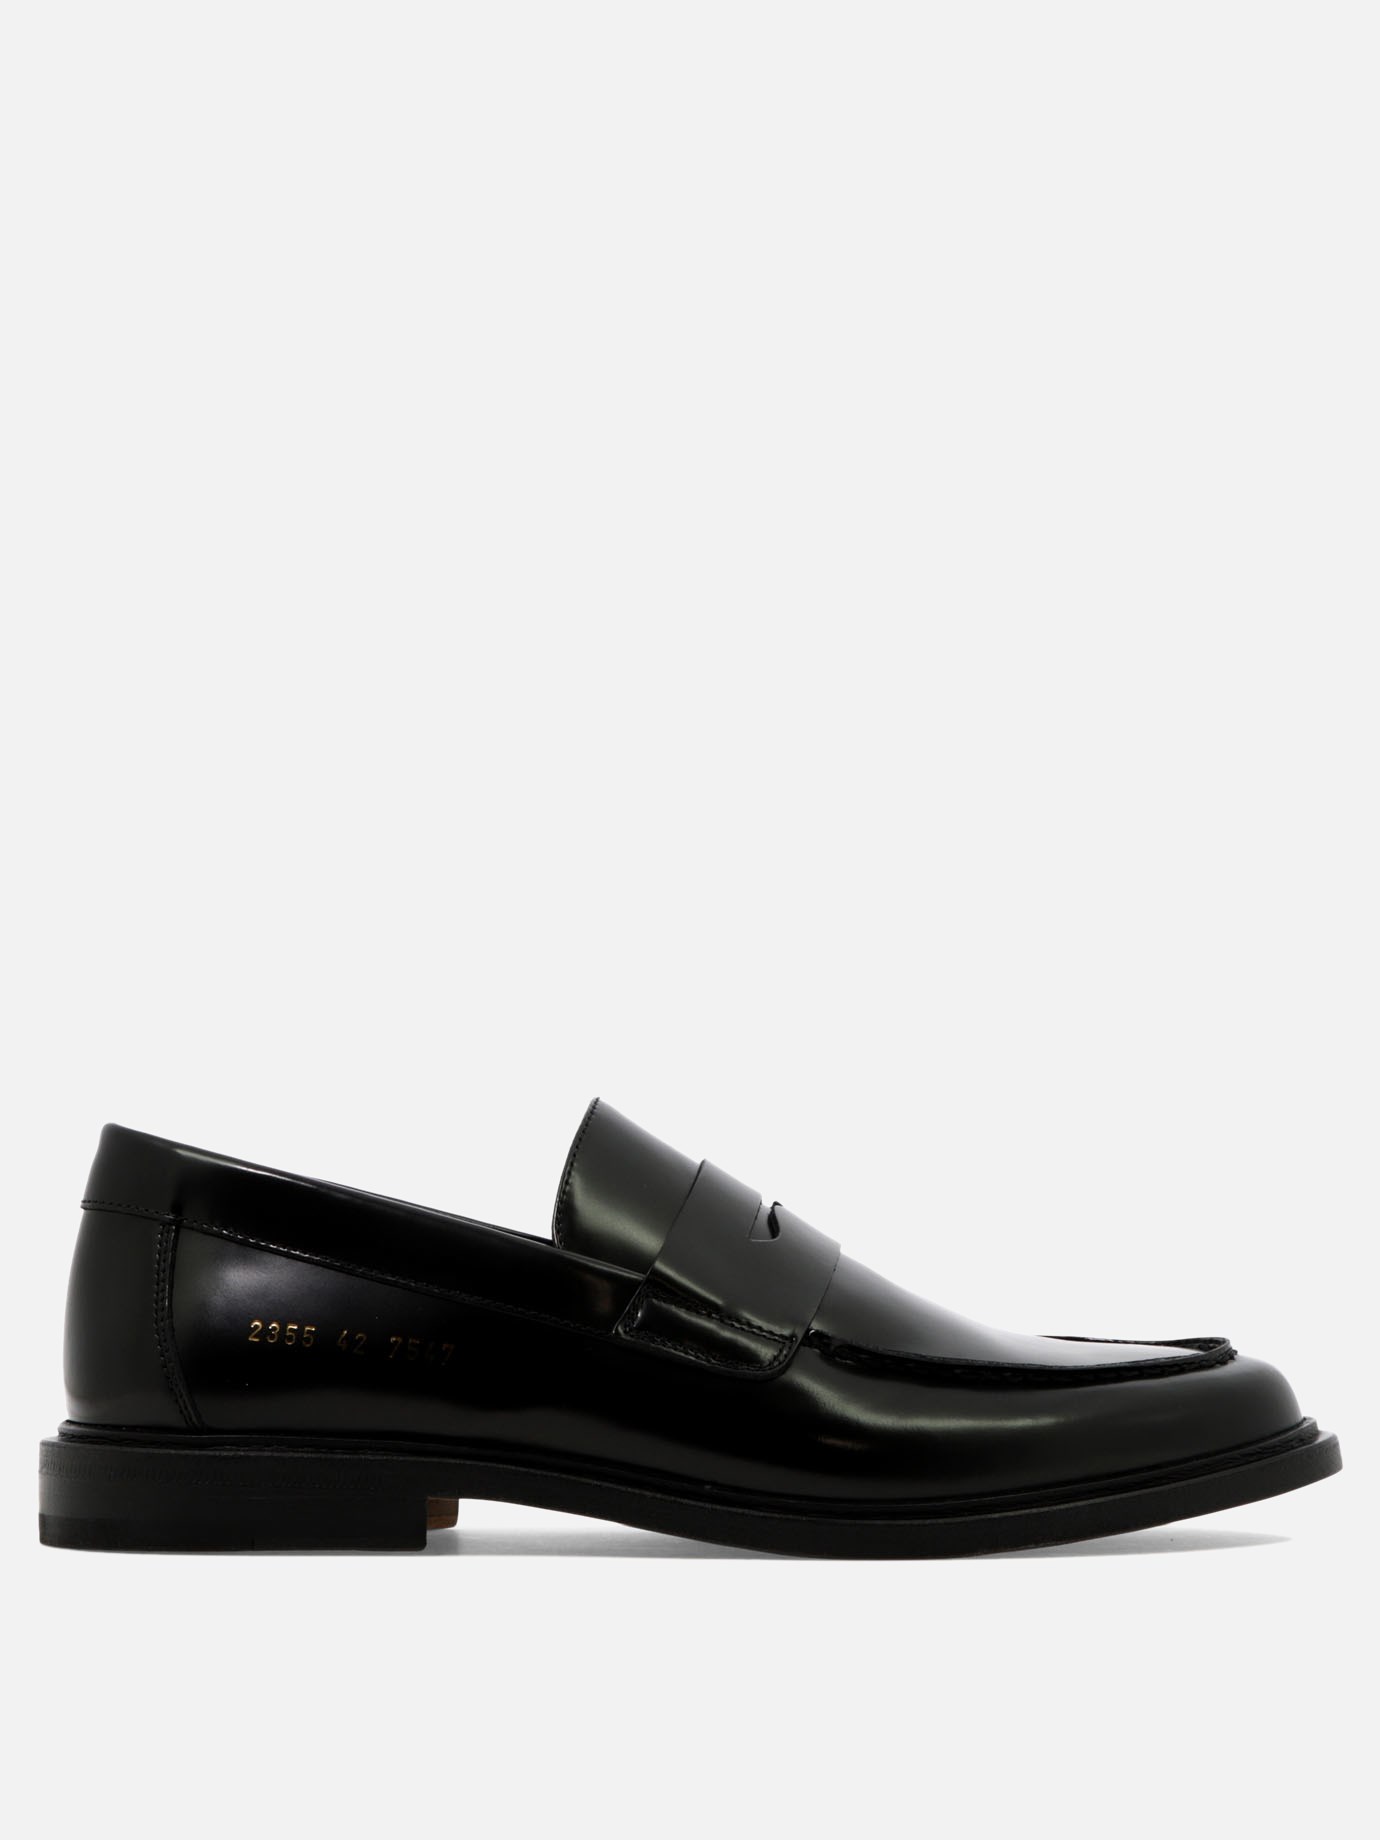  Loafer  loafersby Common Projects - 0